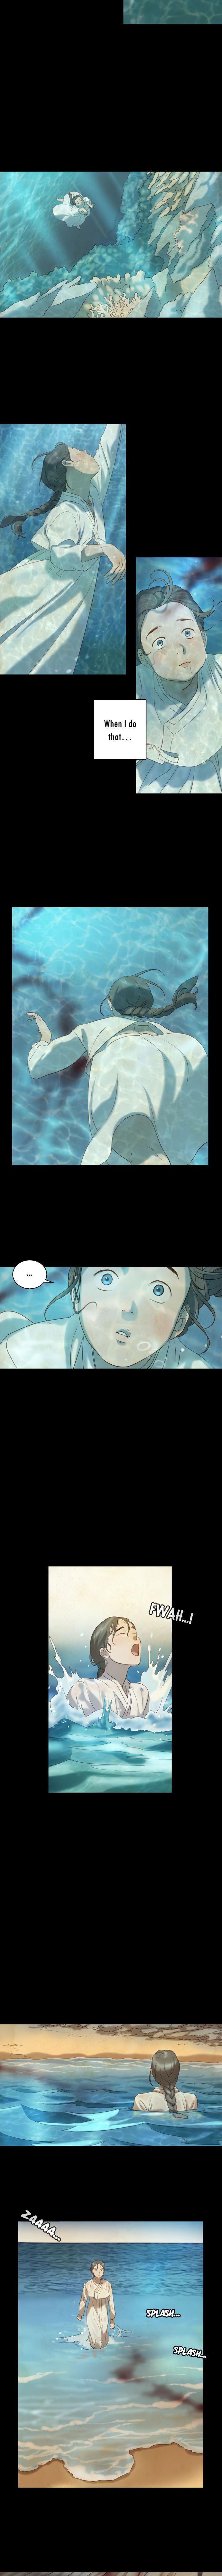 The Whale Star - The Gyeongseong Mermaid - Chapter 1 Page 2